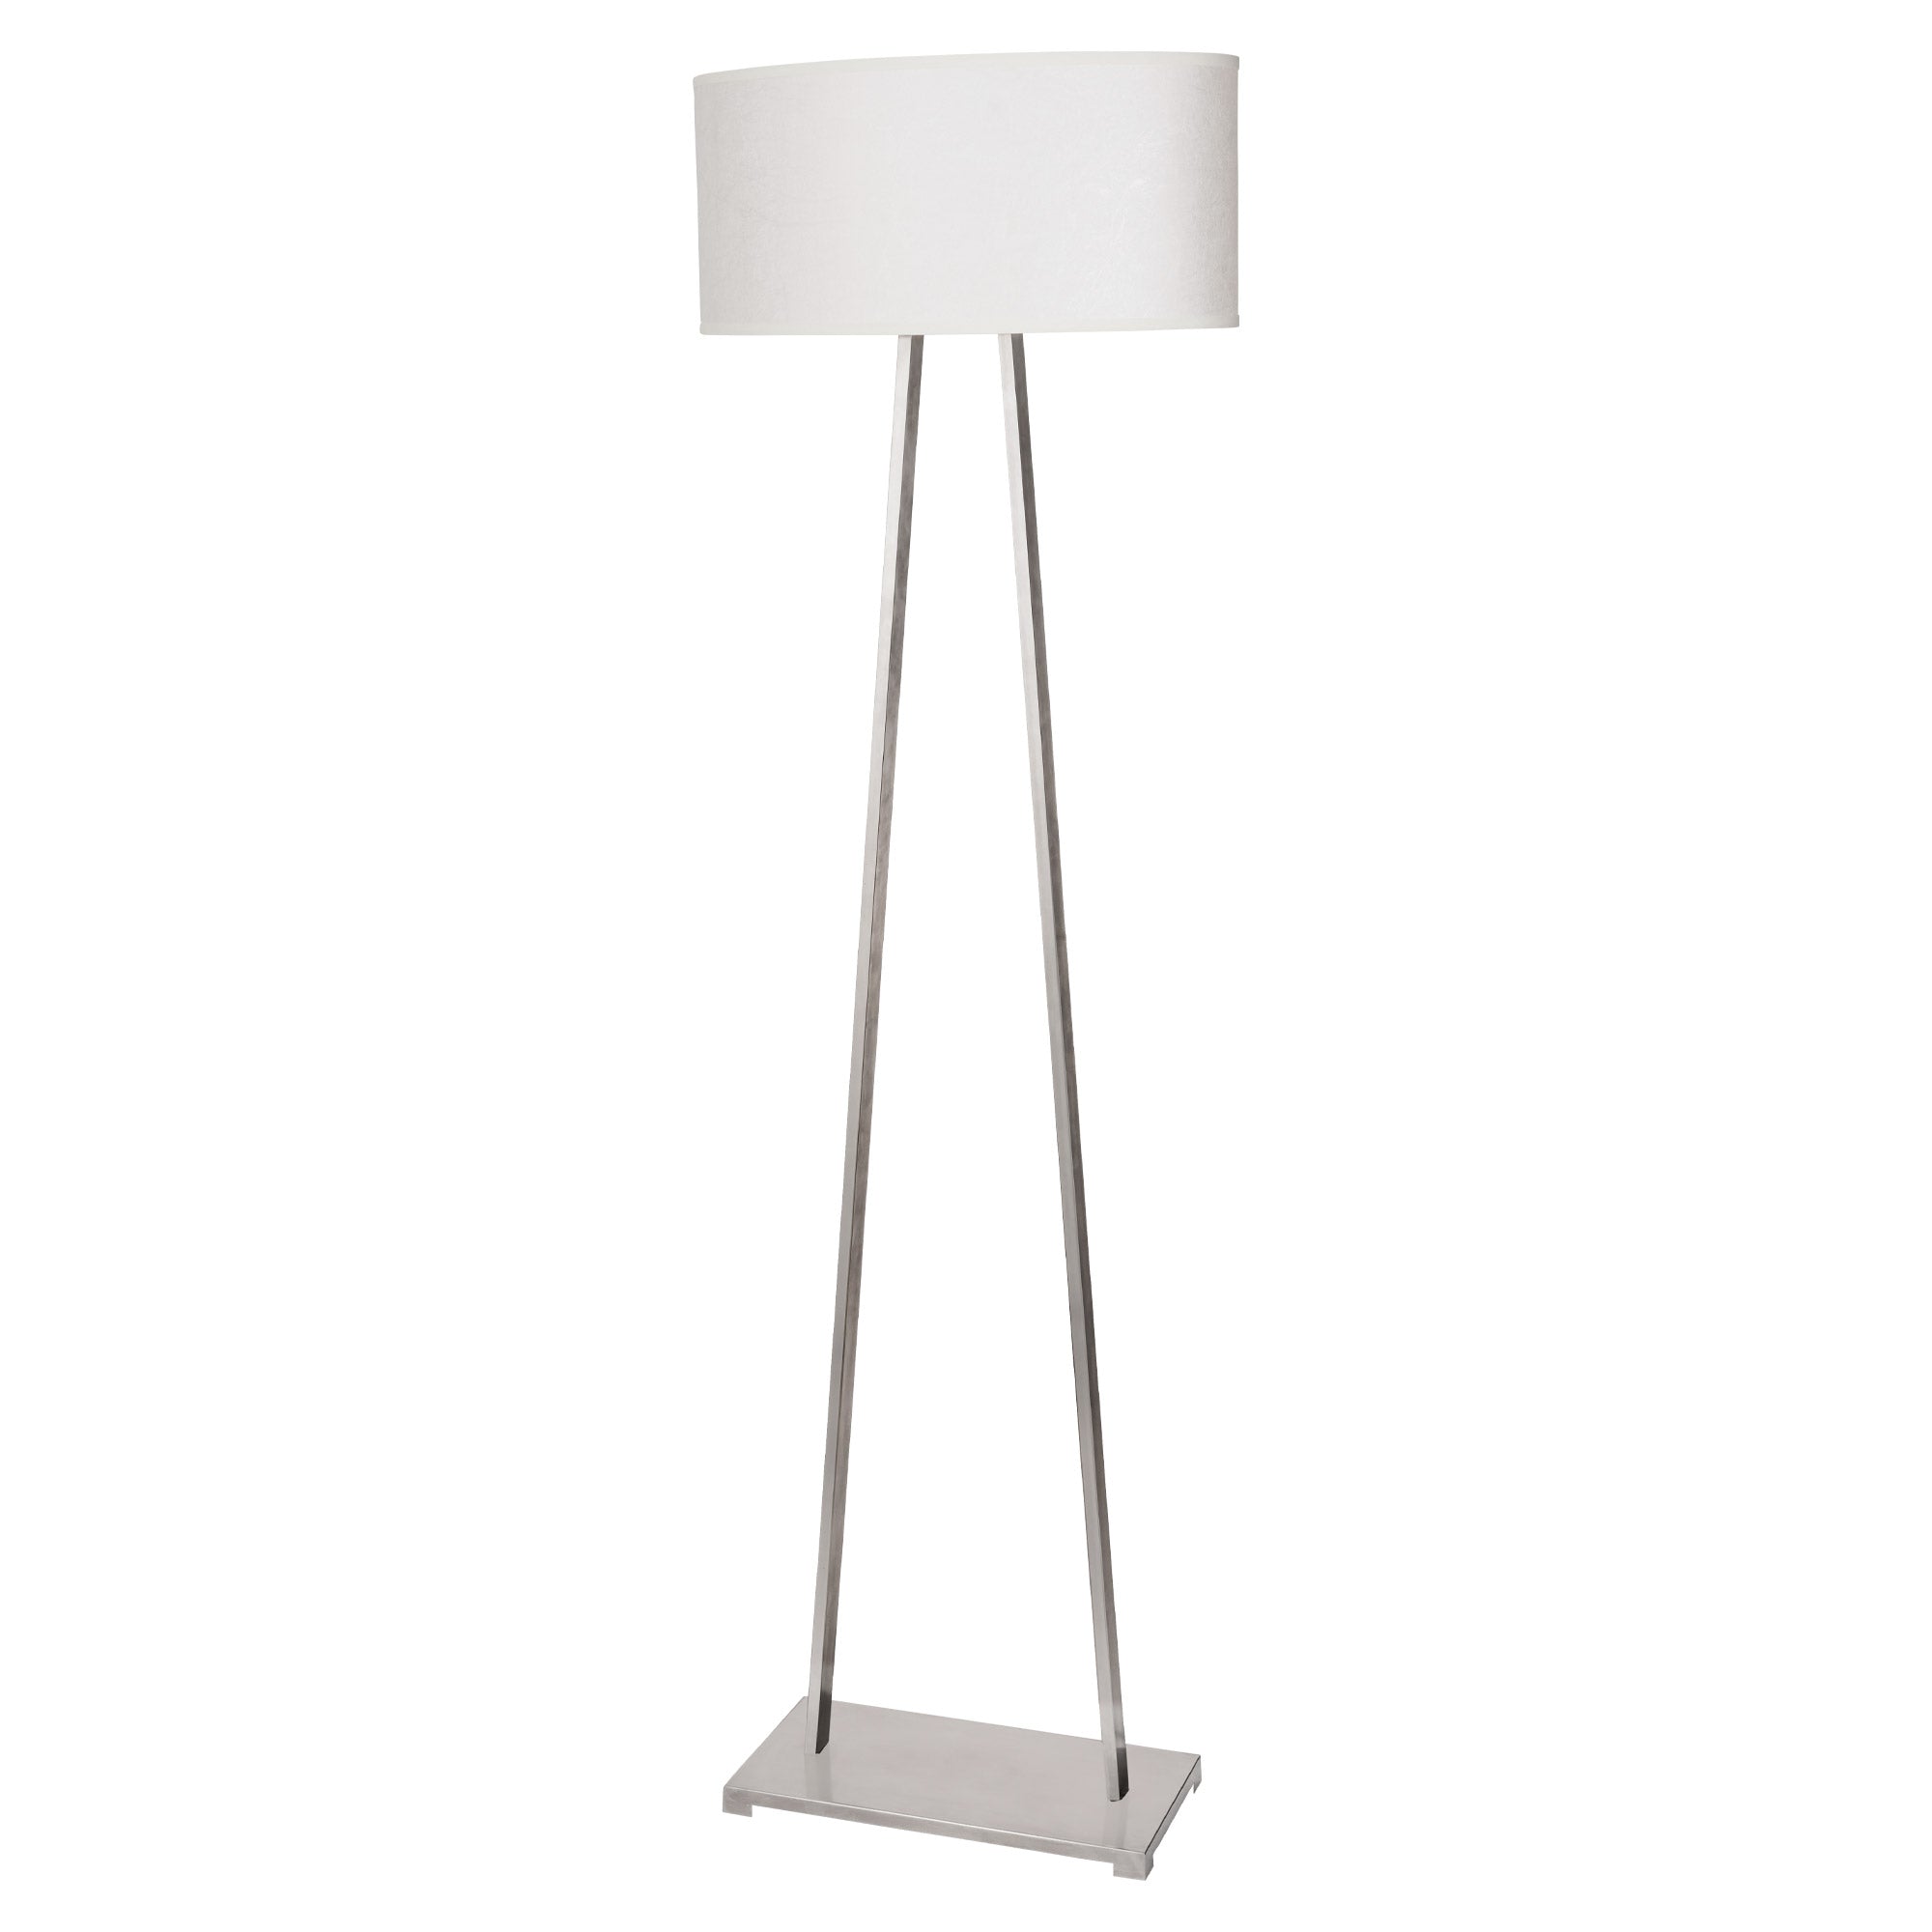 "A" Frame Brushed Nickel Floor Lamp with Oval Shade